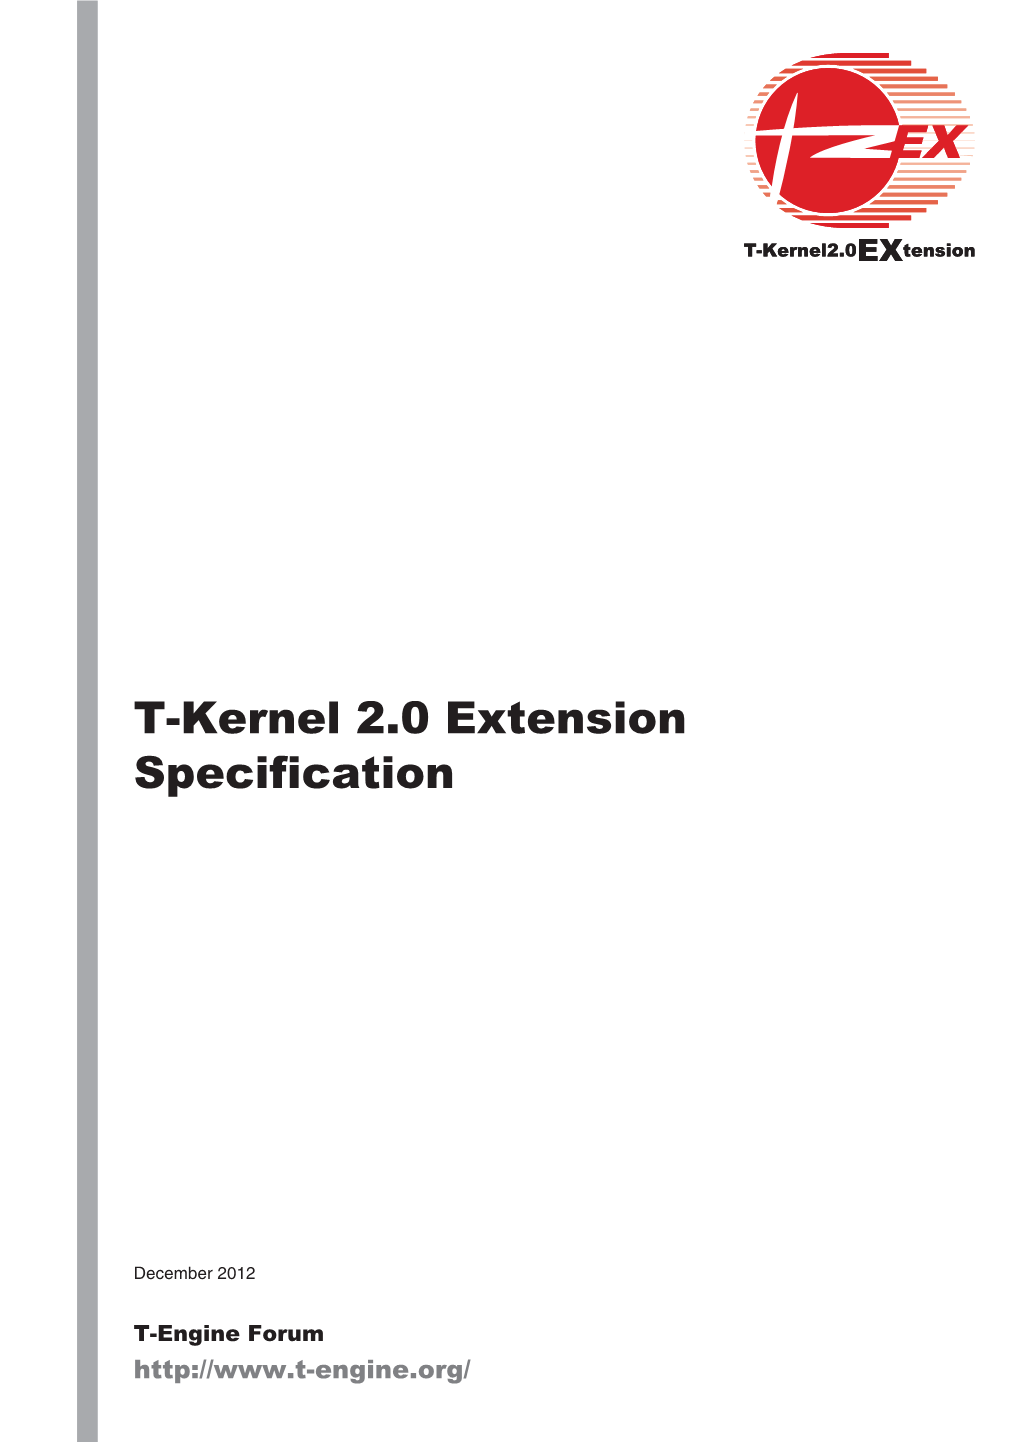 T-Kernel 2.0 Extension Specification (TEF020-S009